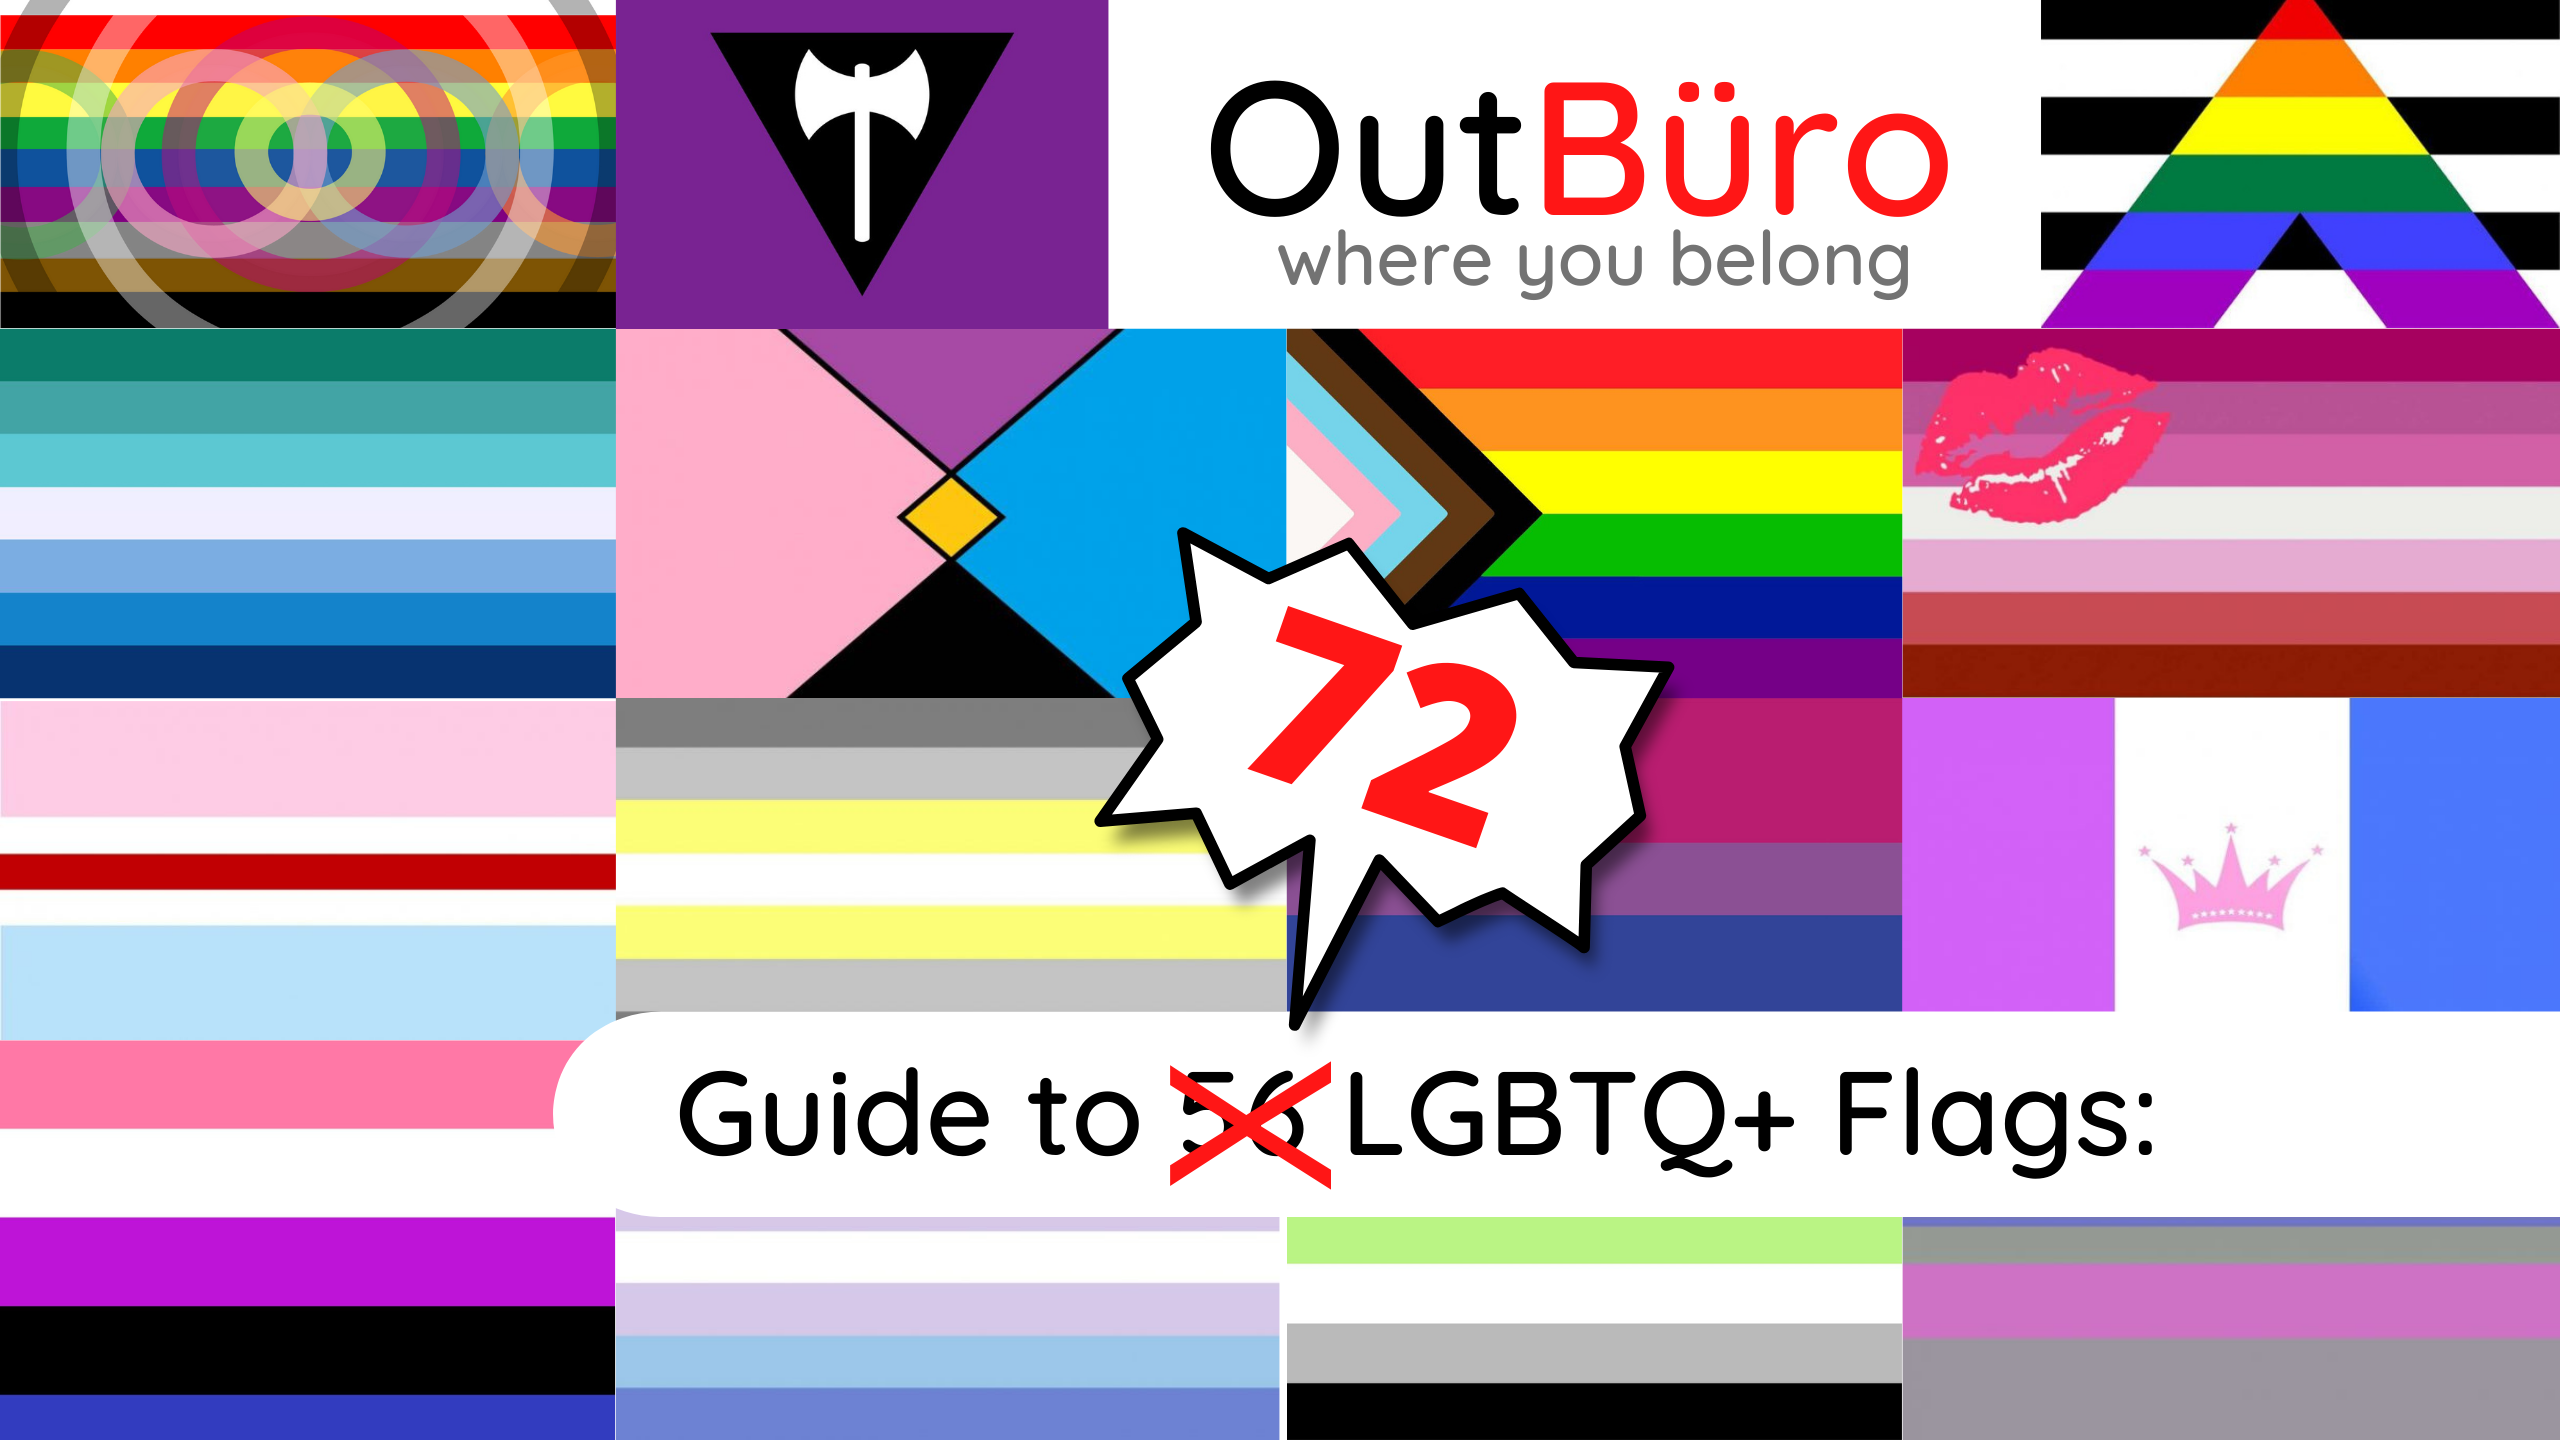 Guide to 72 LGBTQ+ Pride Flags